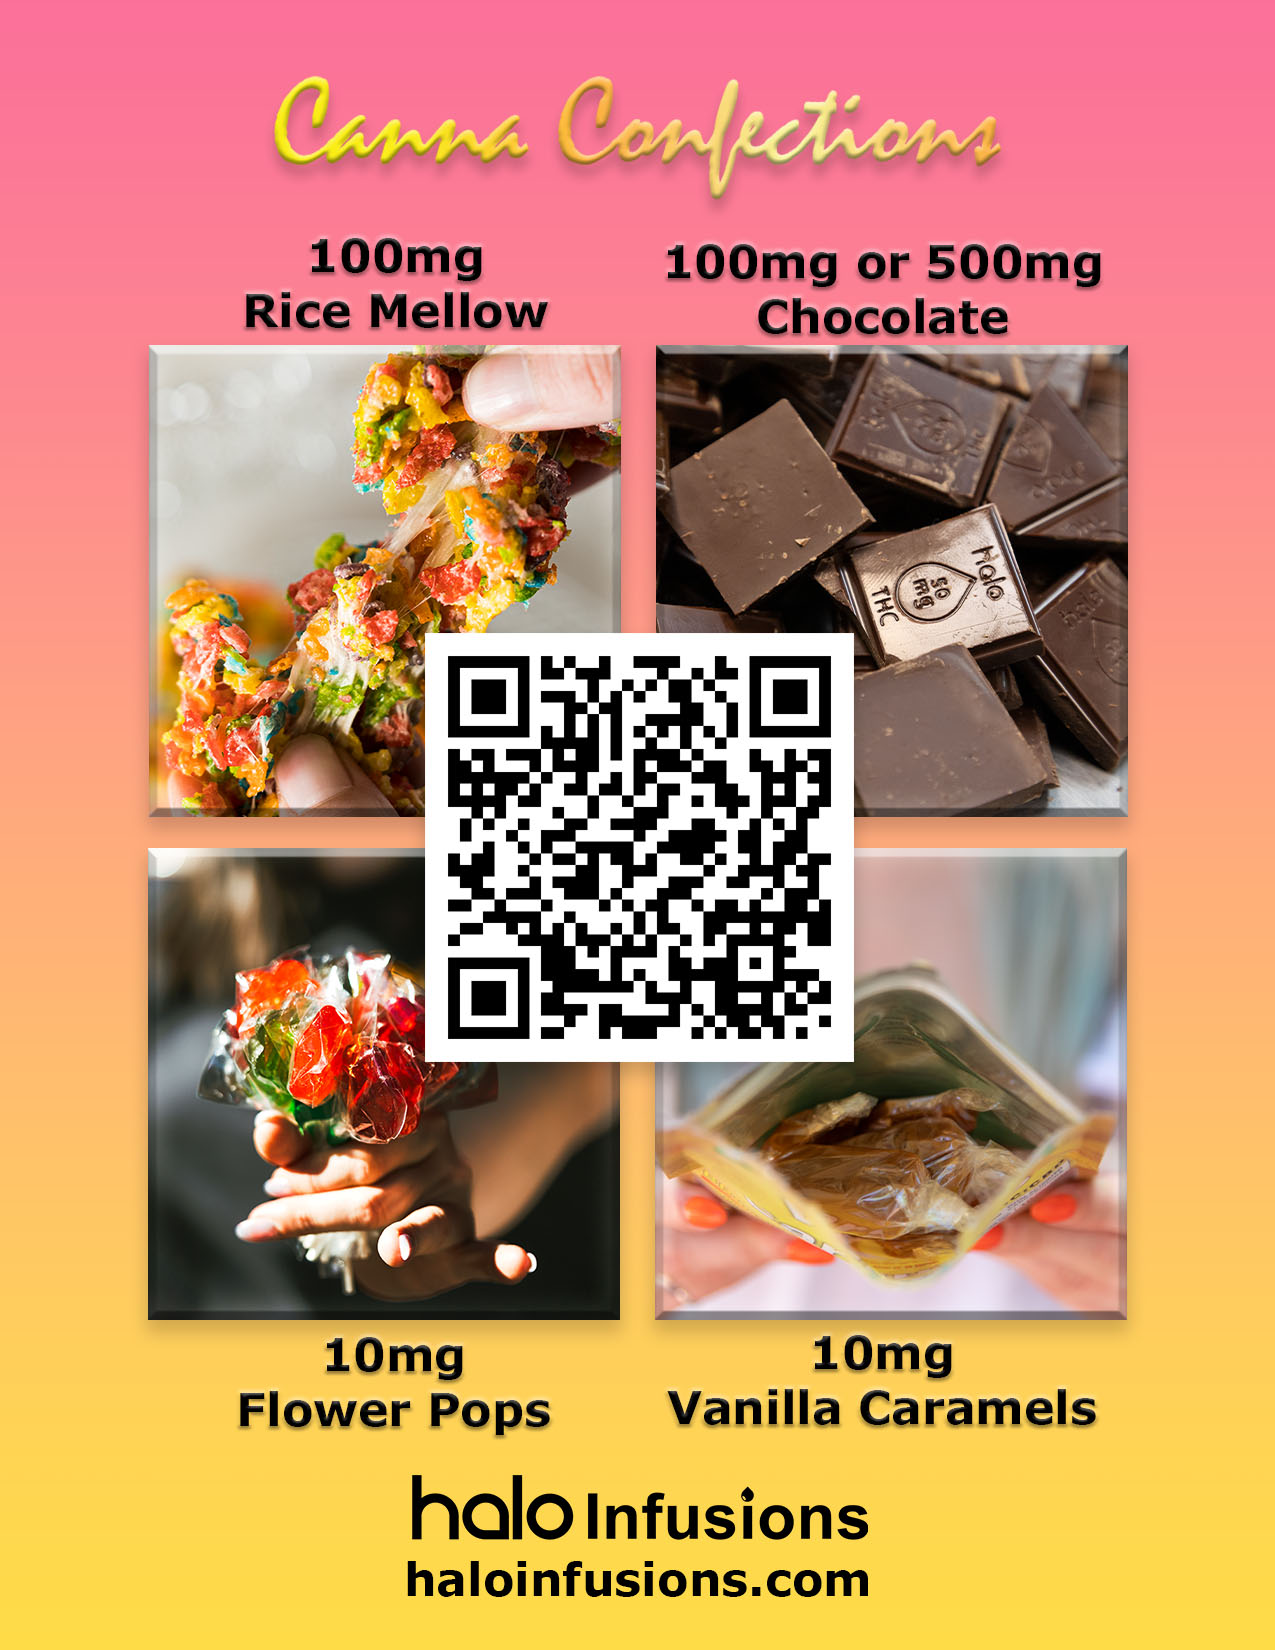 Canna Confections social media page follow for onsites, 100mg rice mellow, 100mg or 500mg chocolate, 10mg flower pop, 10mg vanilla caramels, Halo Infusions